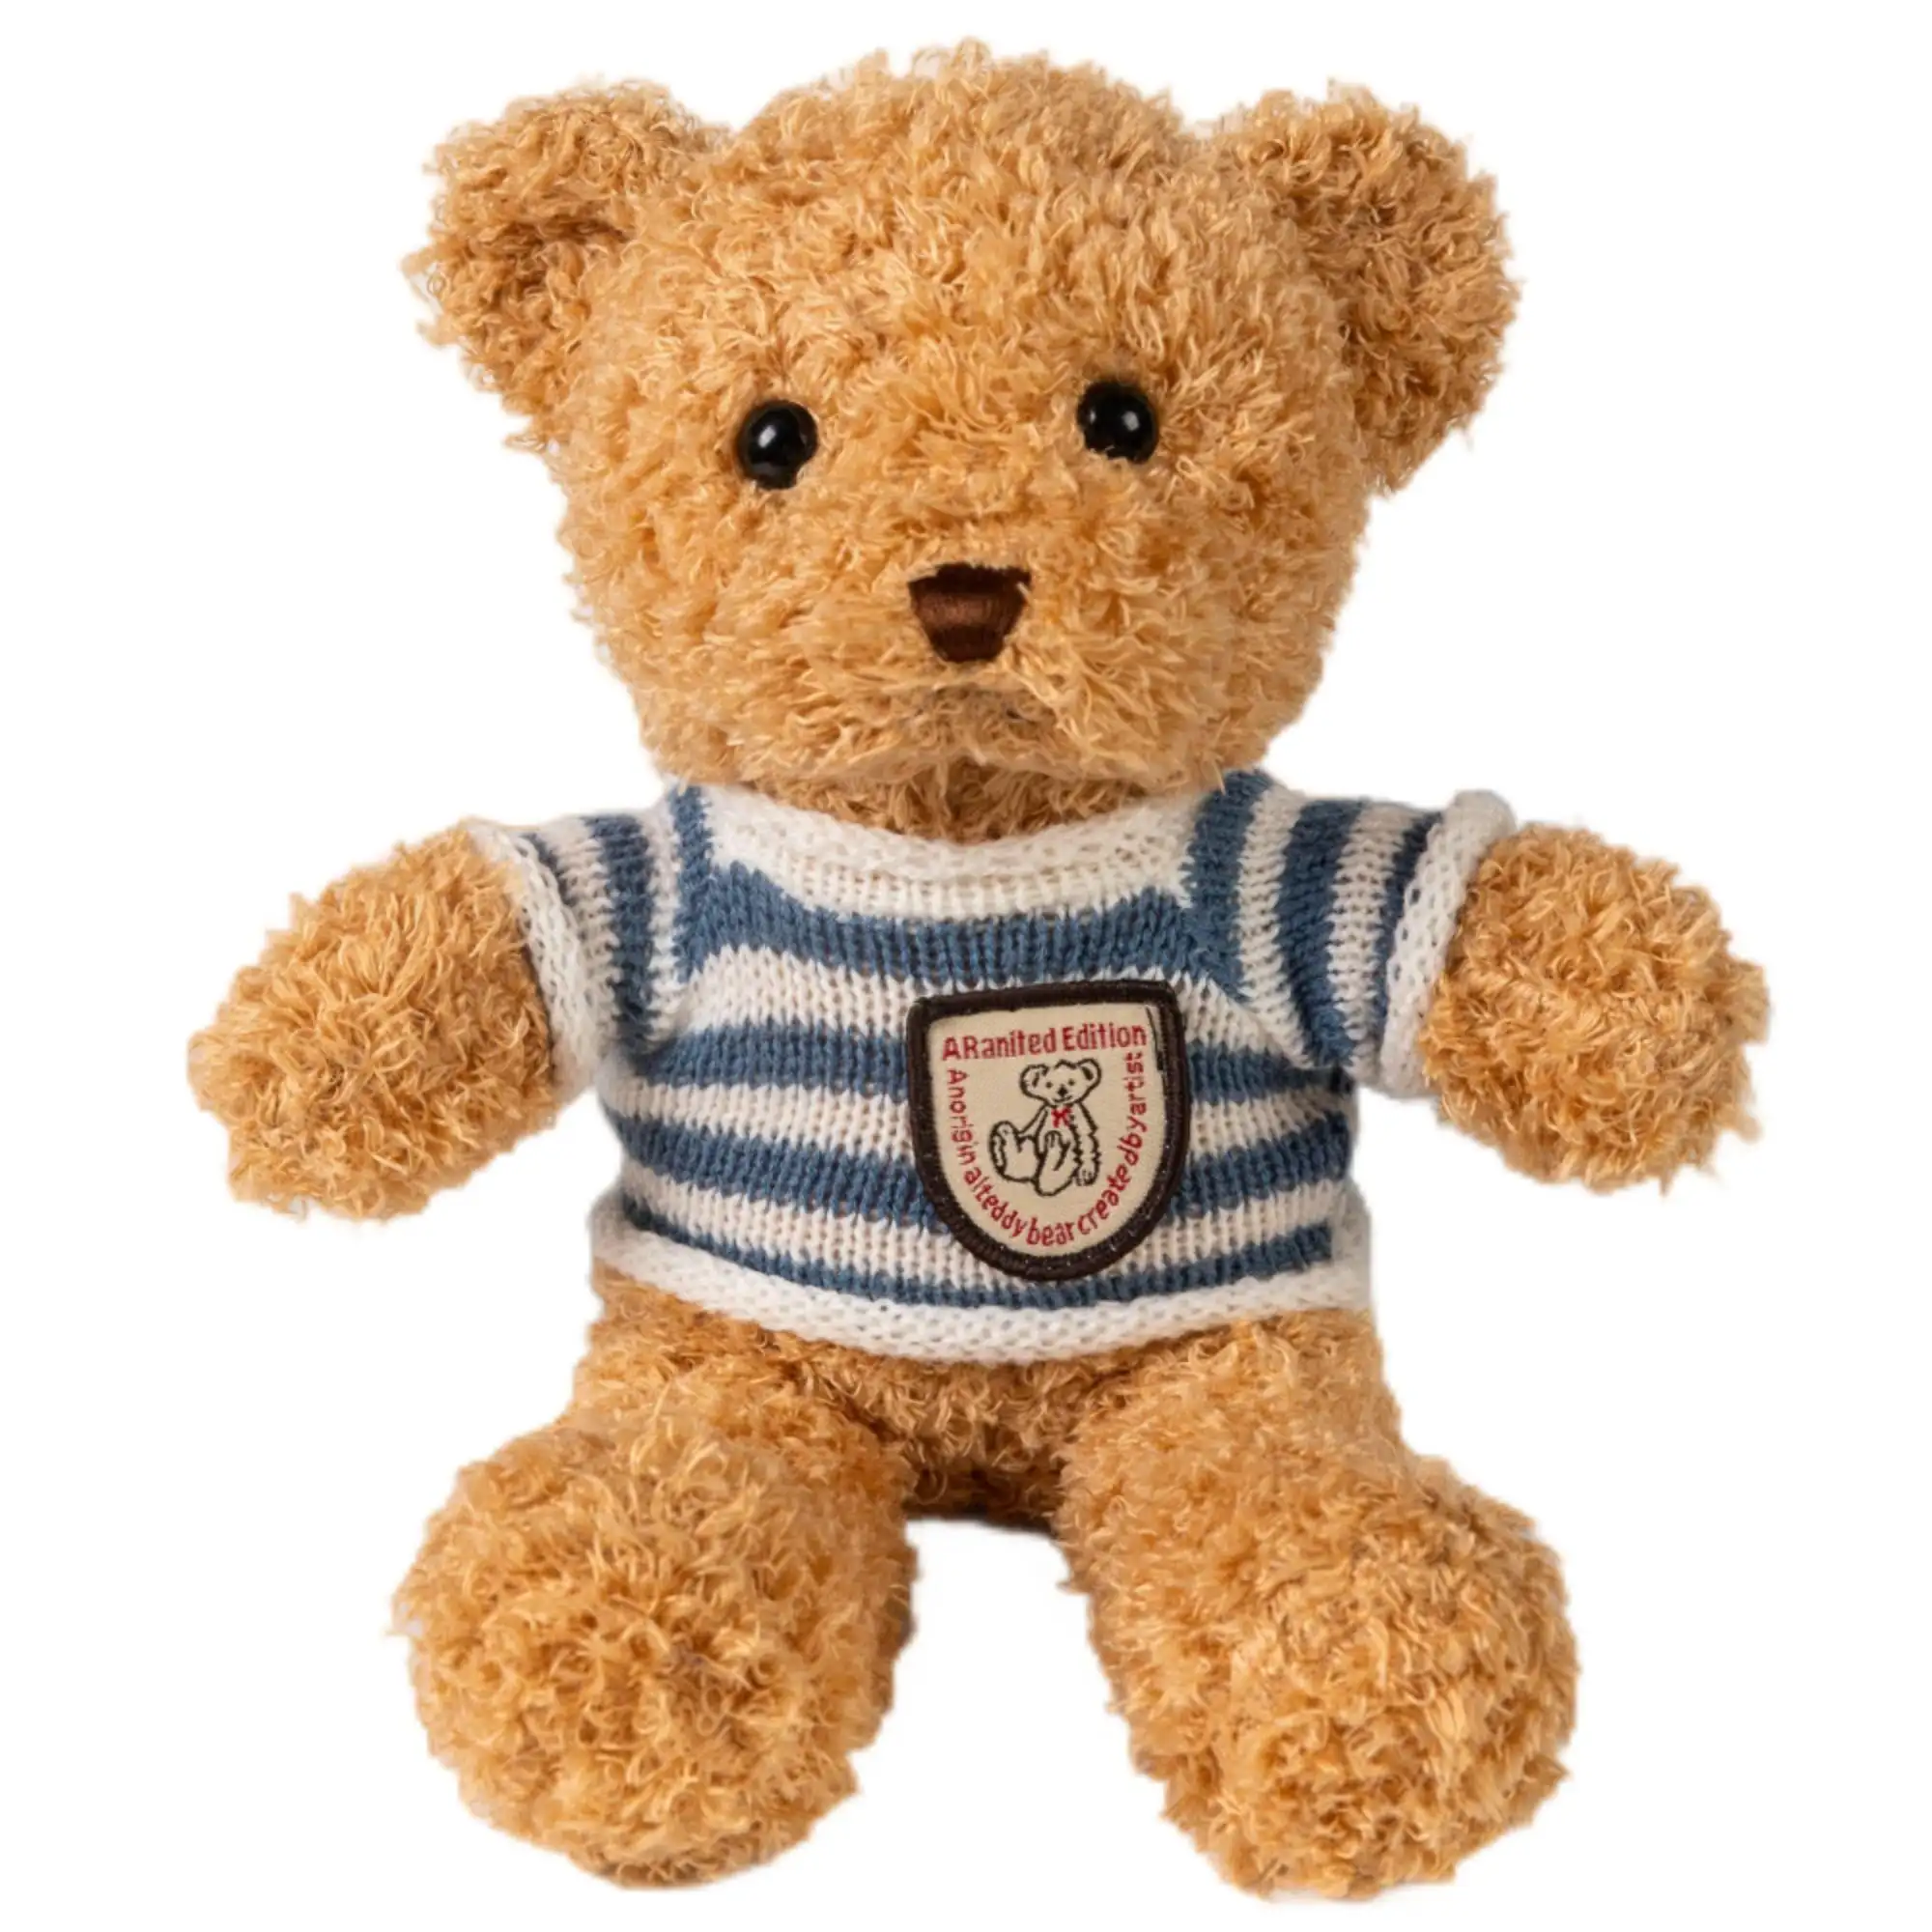 Teddy Bear Stuffed Animals with Clothes Cute Plush Bear with Removable Clothes Sweater Stuffed Animals Change Clothes